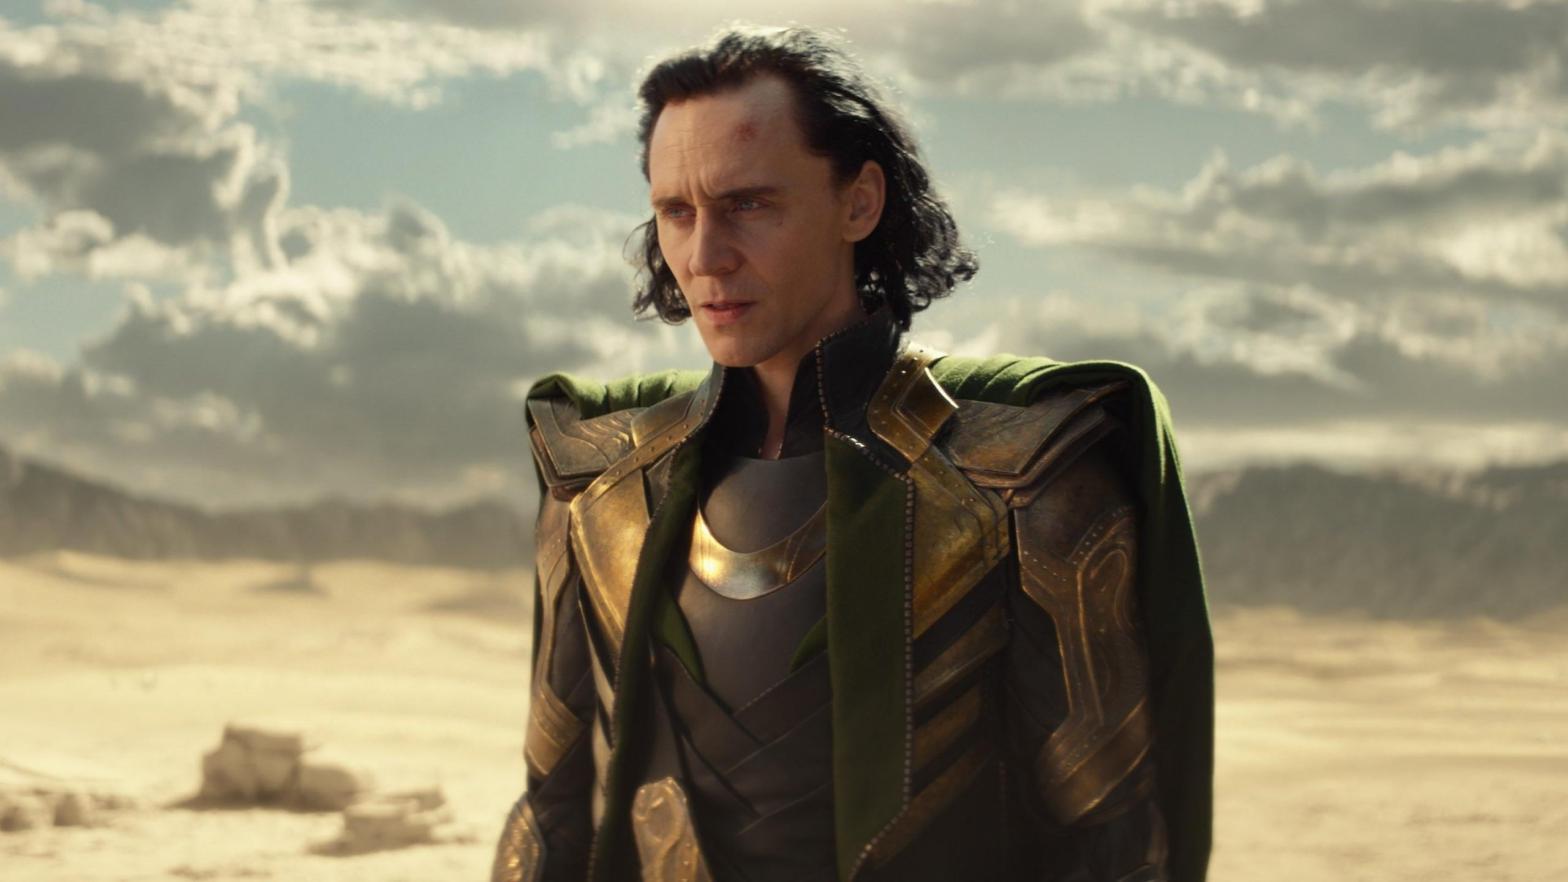 Loki has found himself at an unexpected point in the timeline. (Image: Disney+/Marvel)